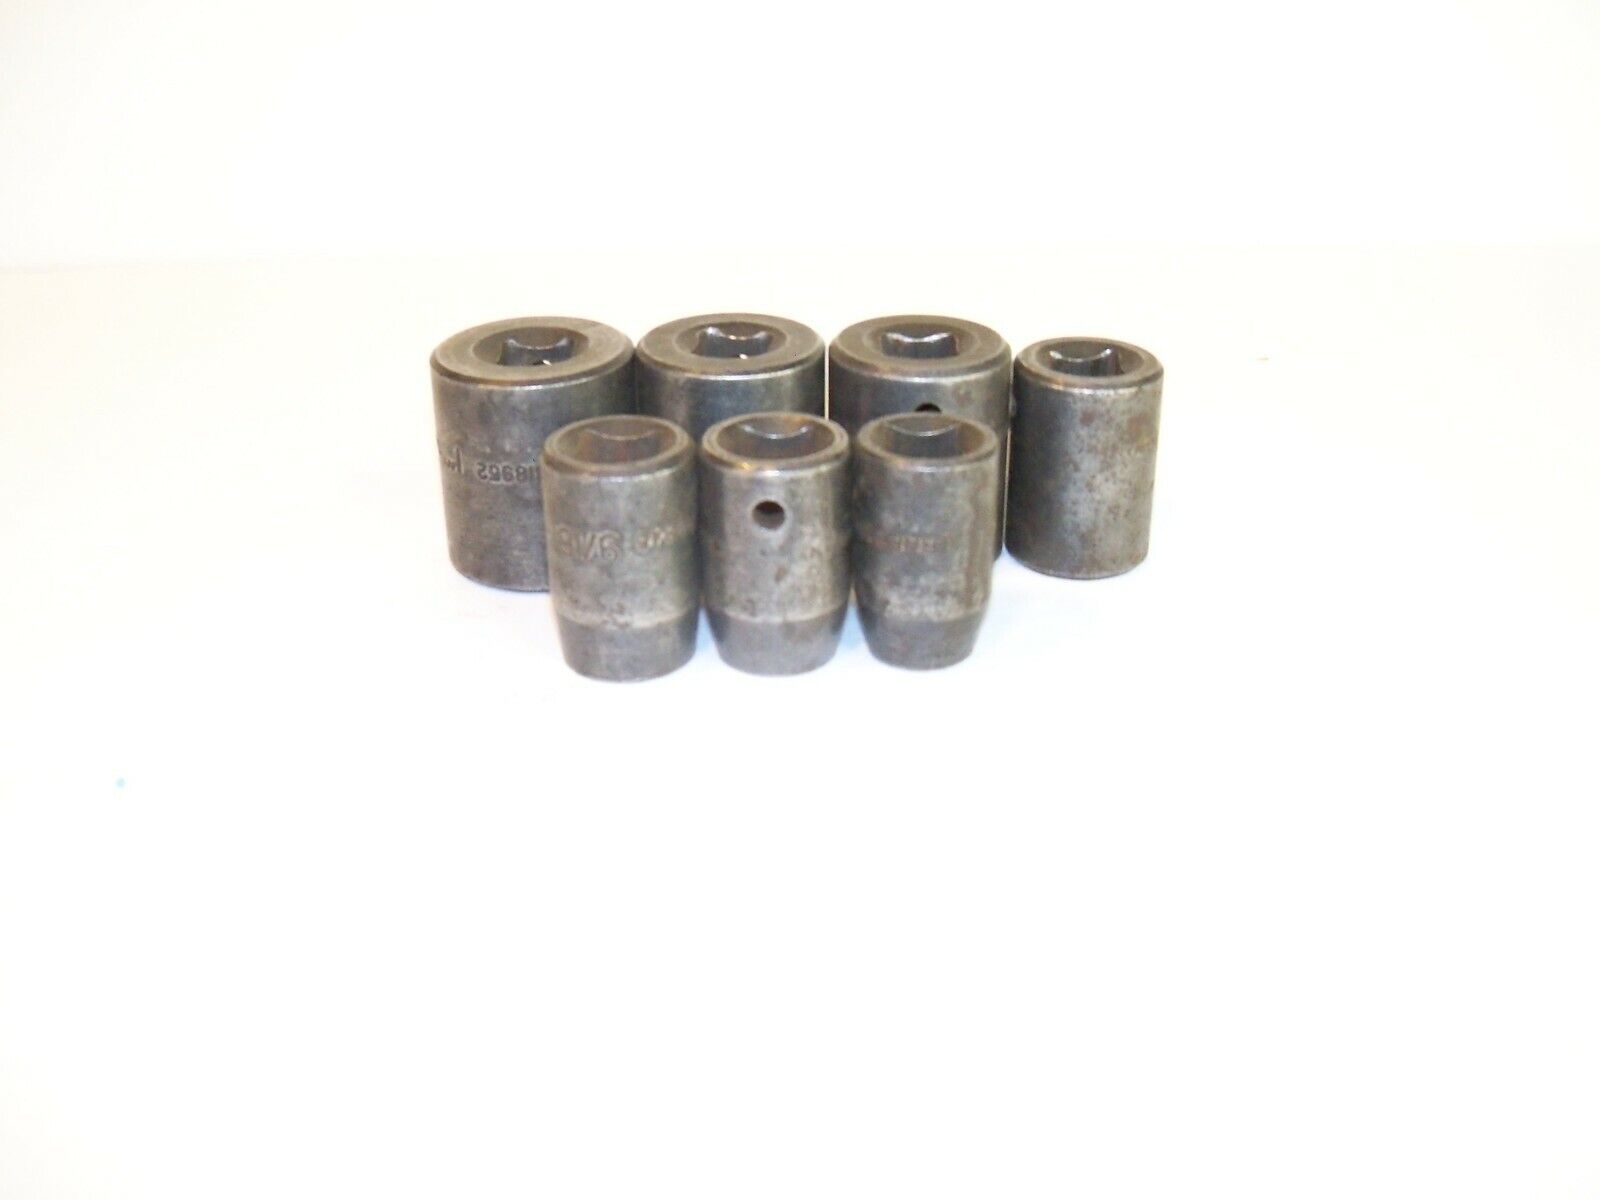 Craftsman 6 Point impact Sockets 7 Pieces